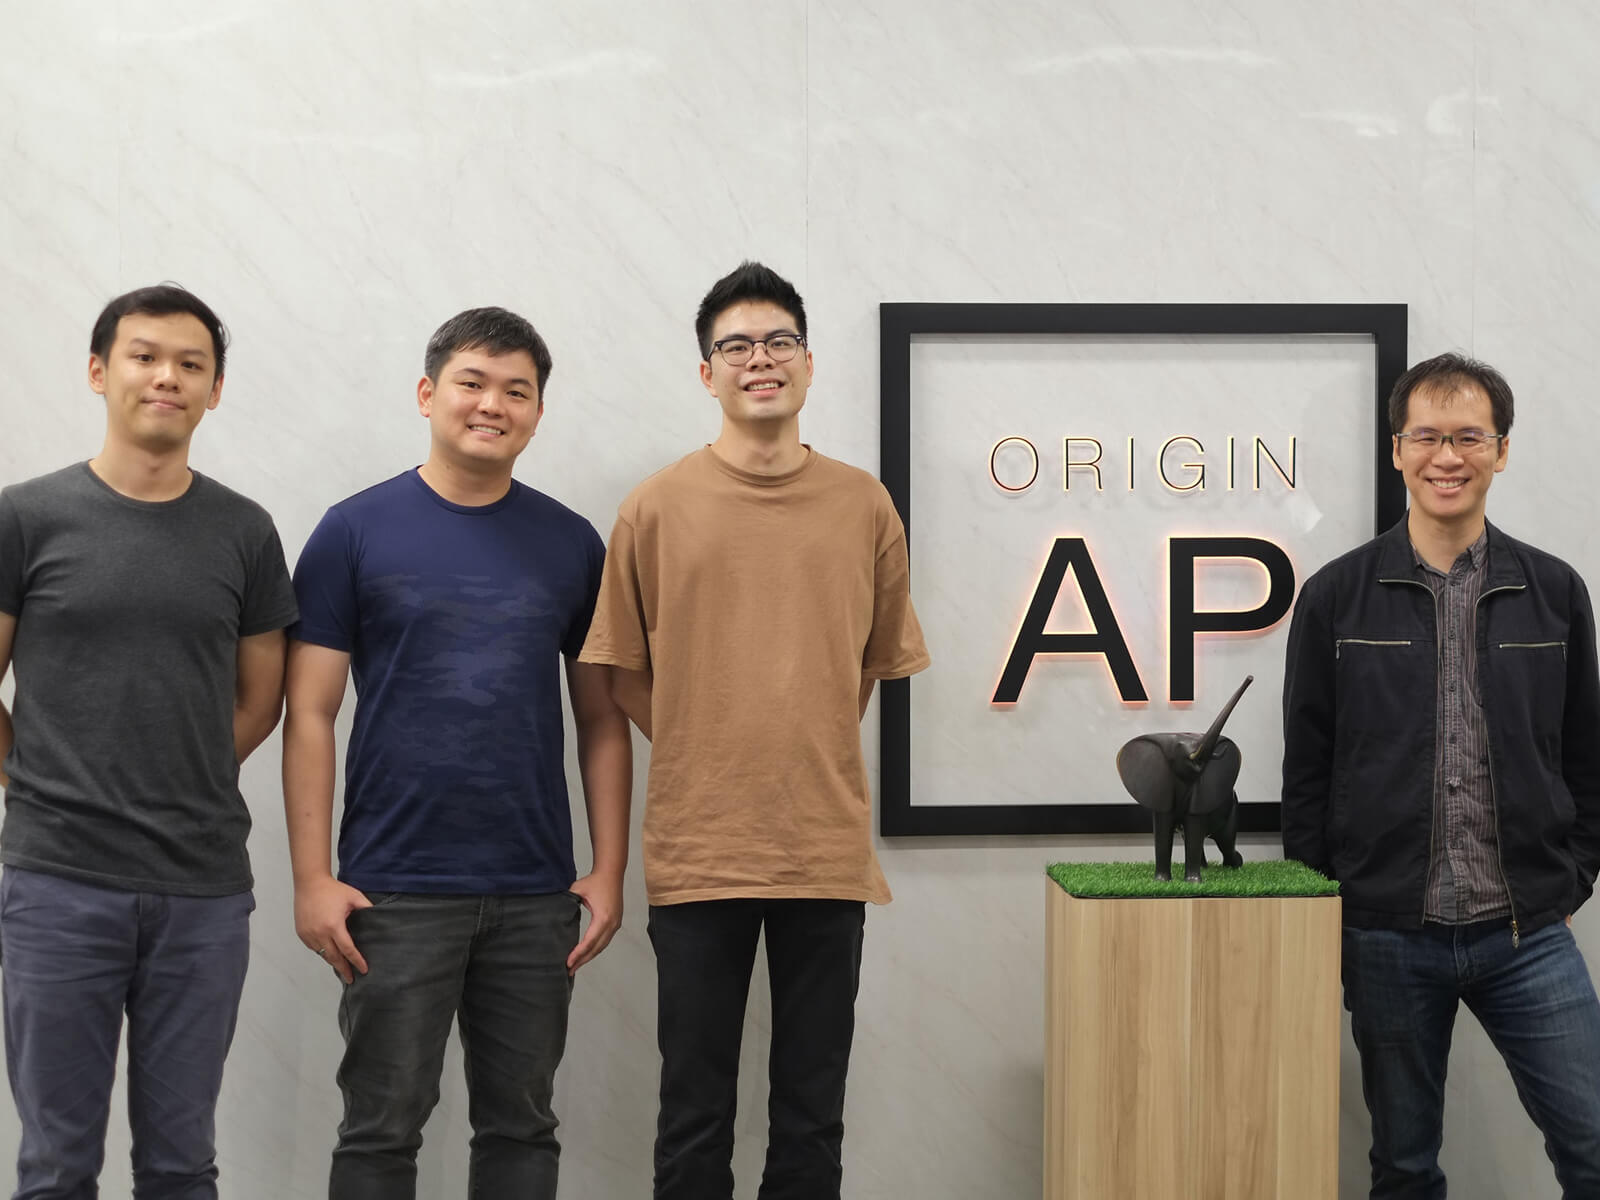 DigiPen alumni stand against a white marble wall with the Origin A P logo between them